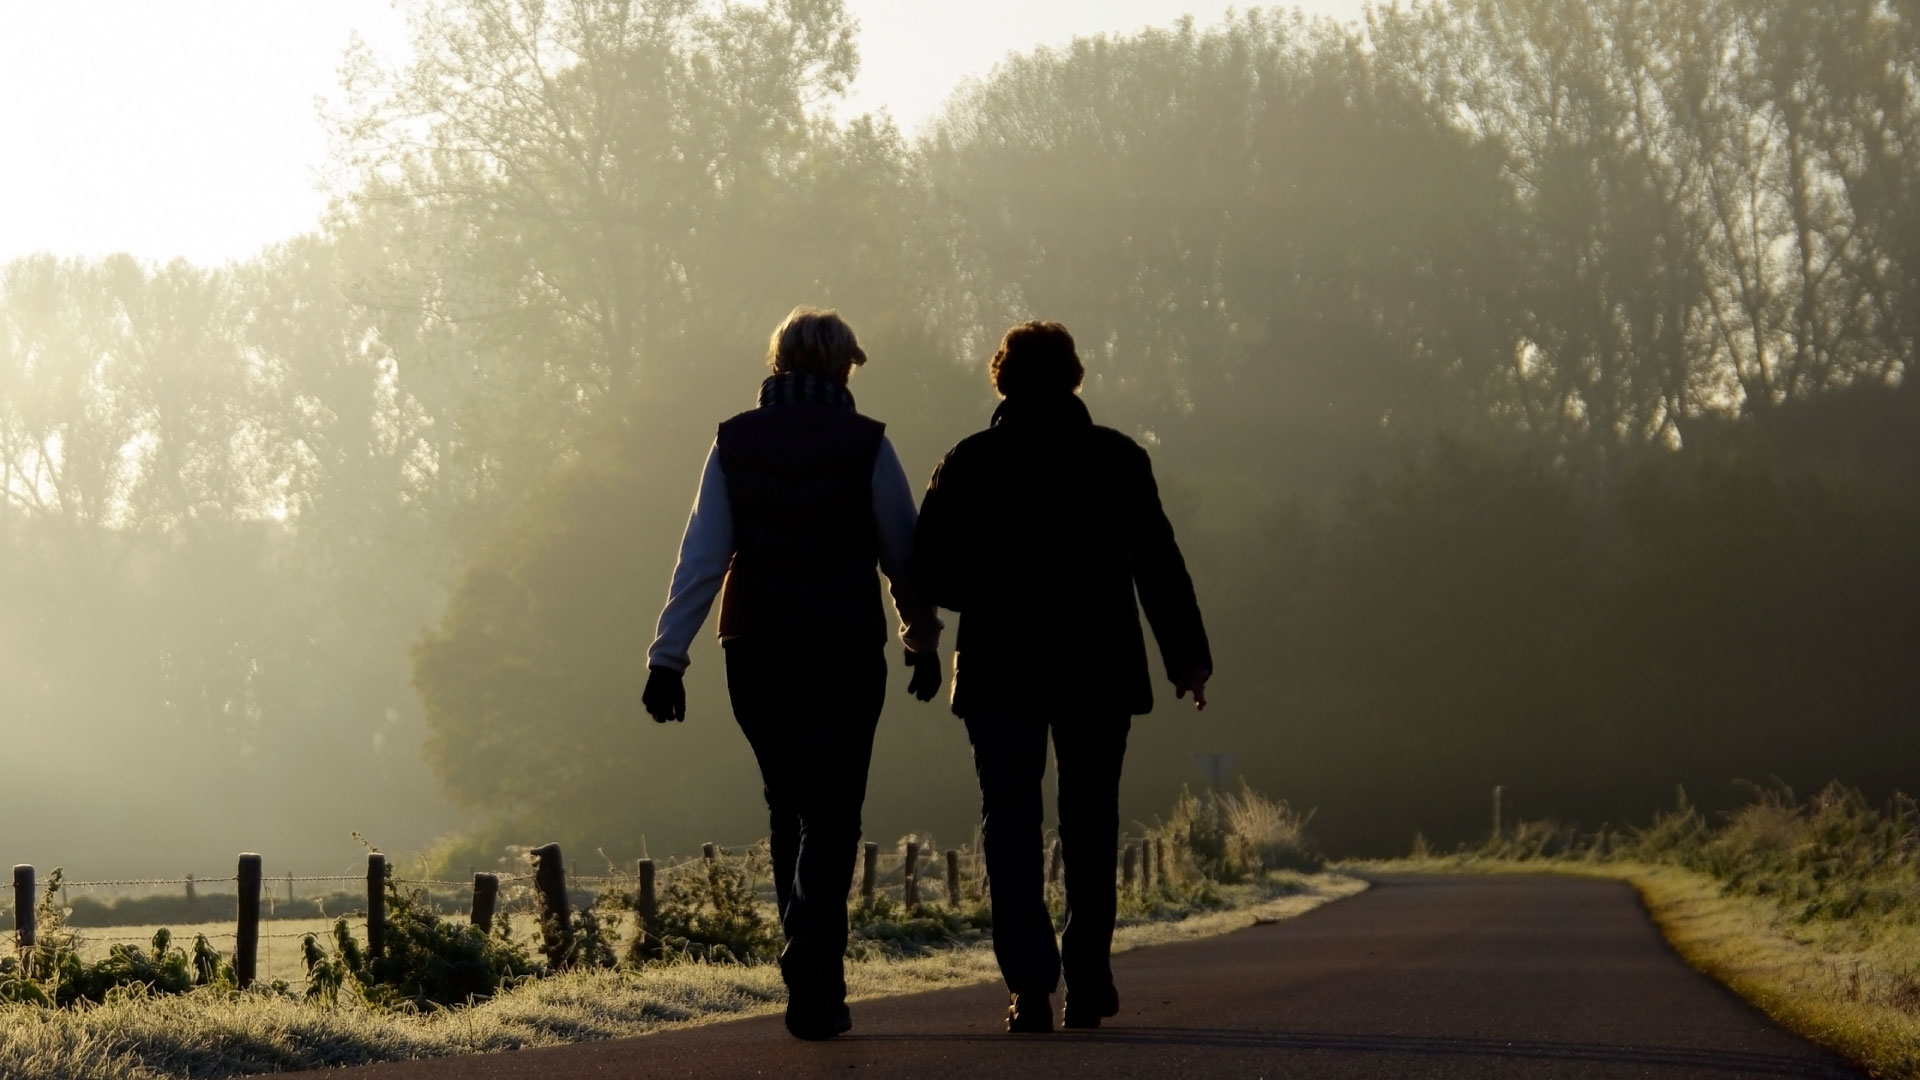 Two women walking on a path in the country.